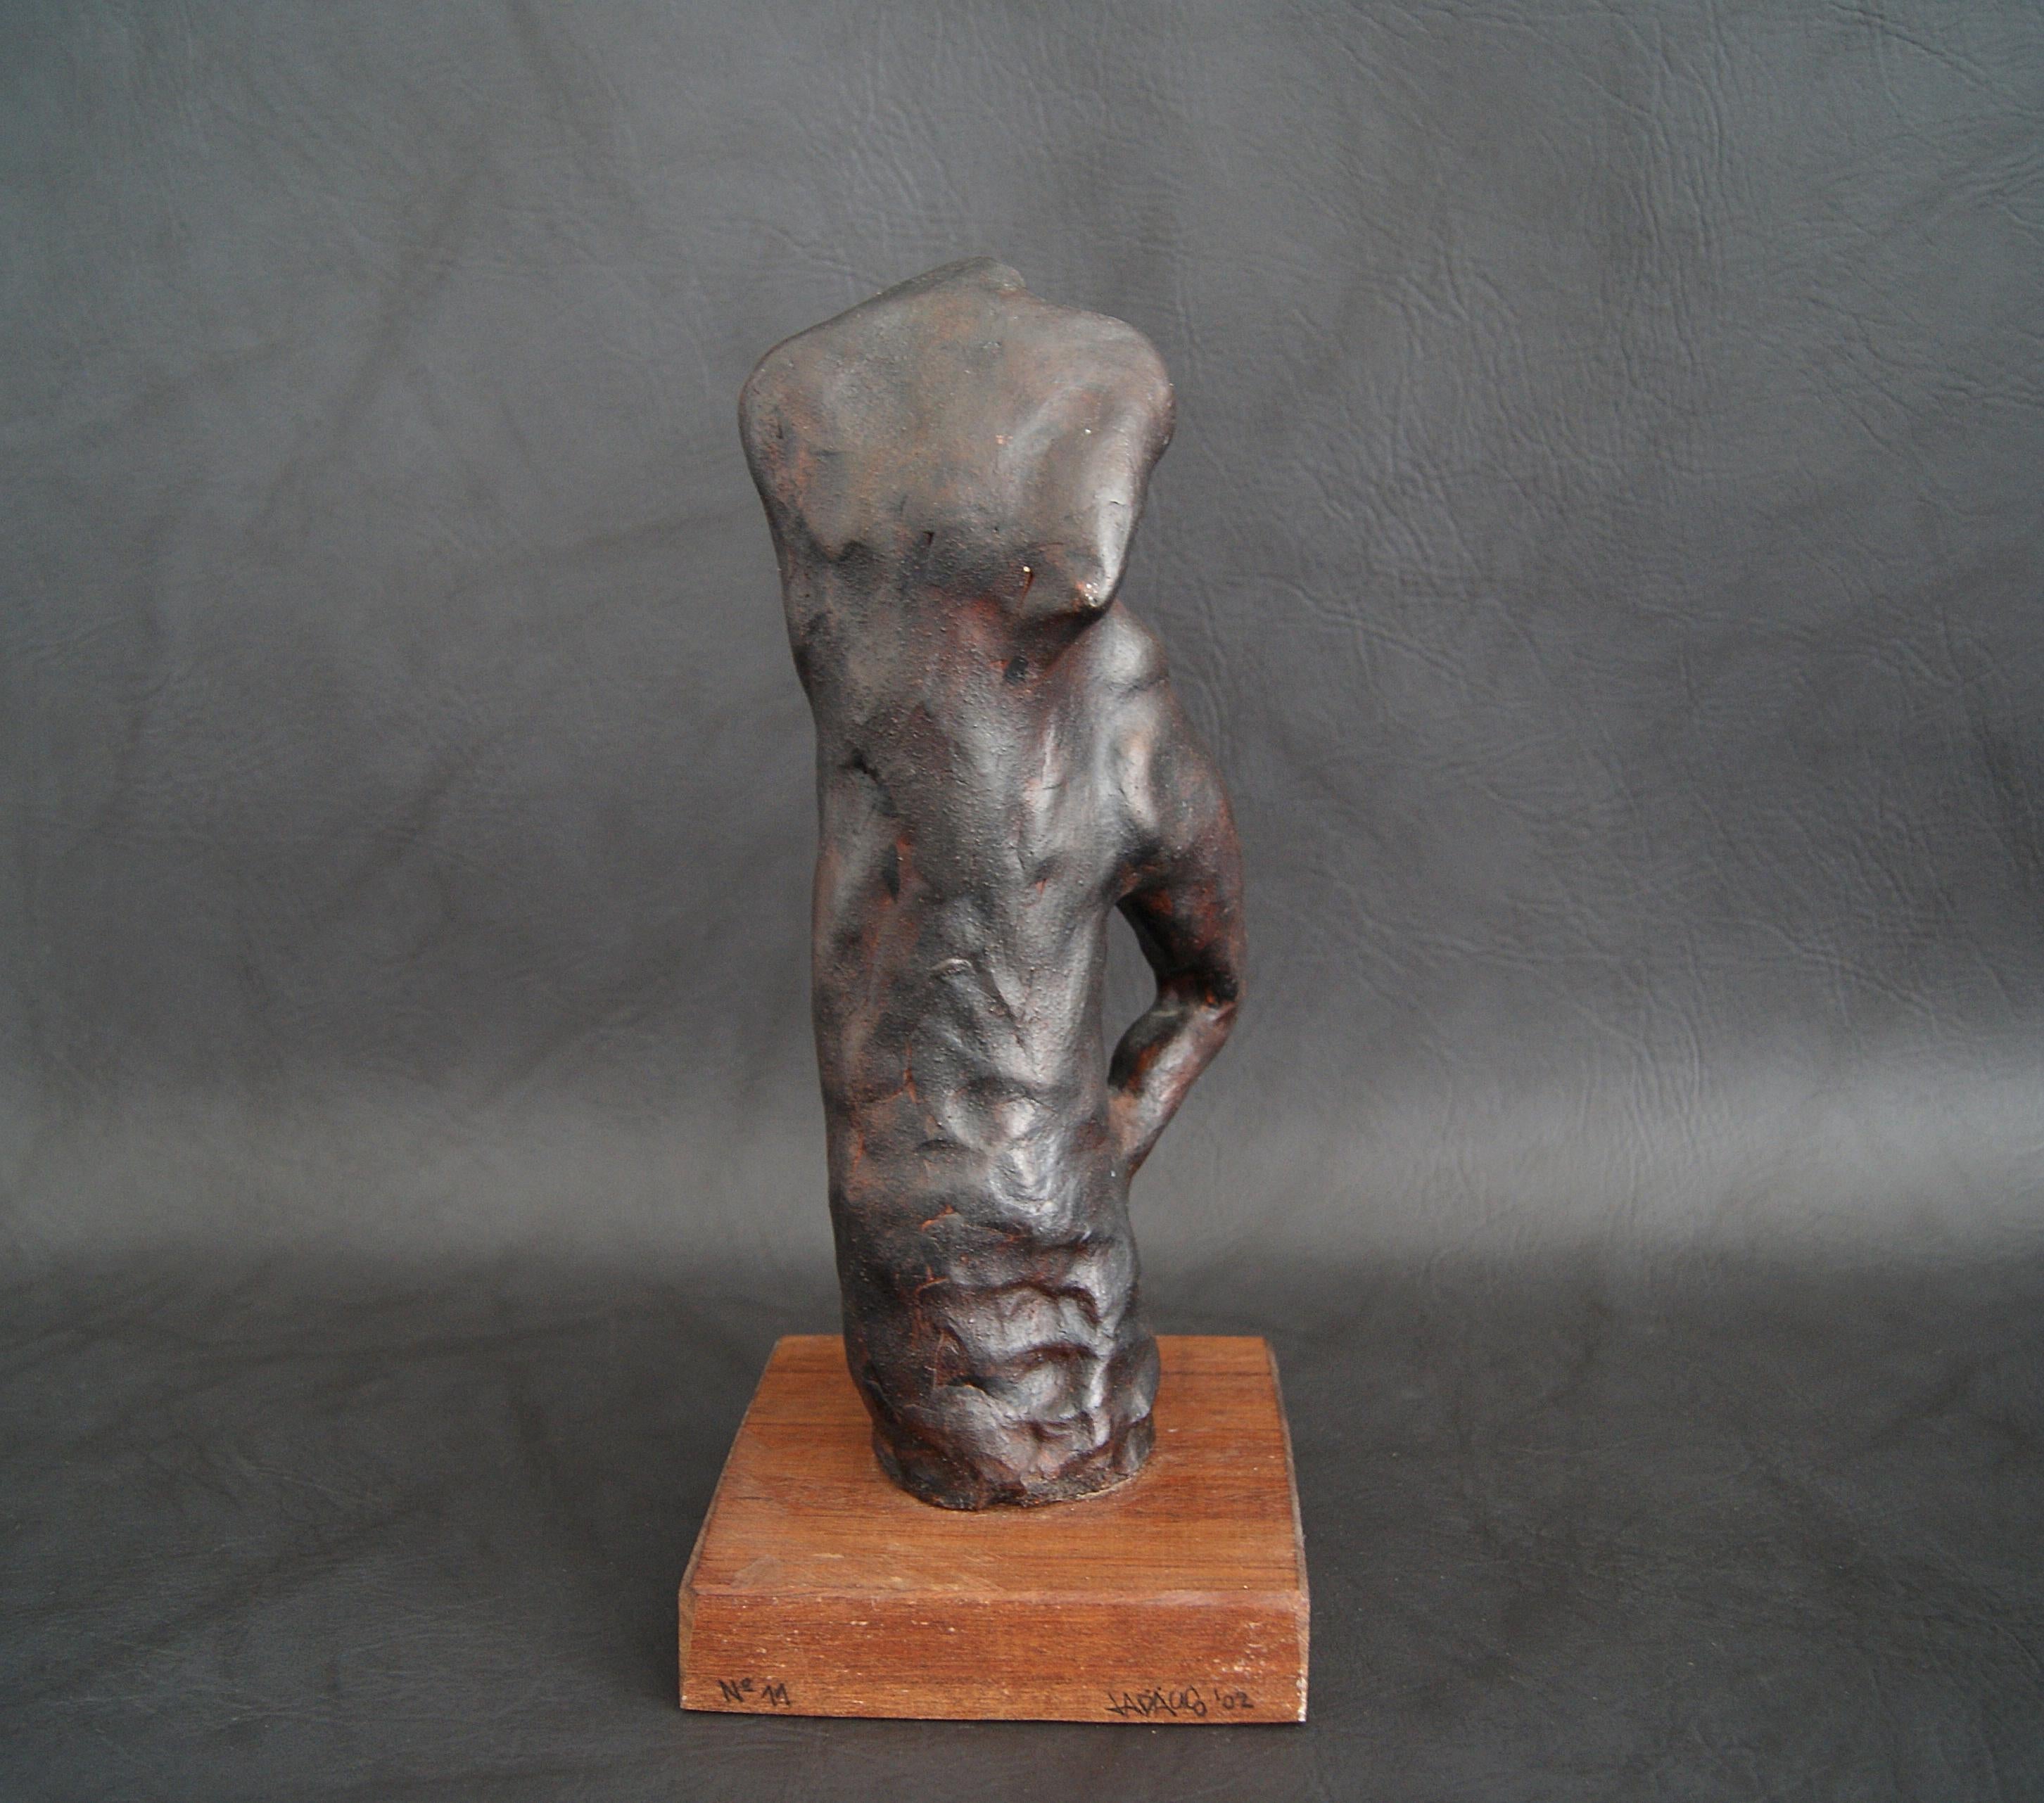 German Plaster Sculpture Bronze Patinated Abstract Art For Sale